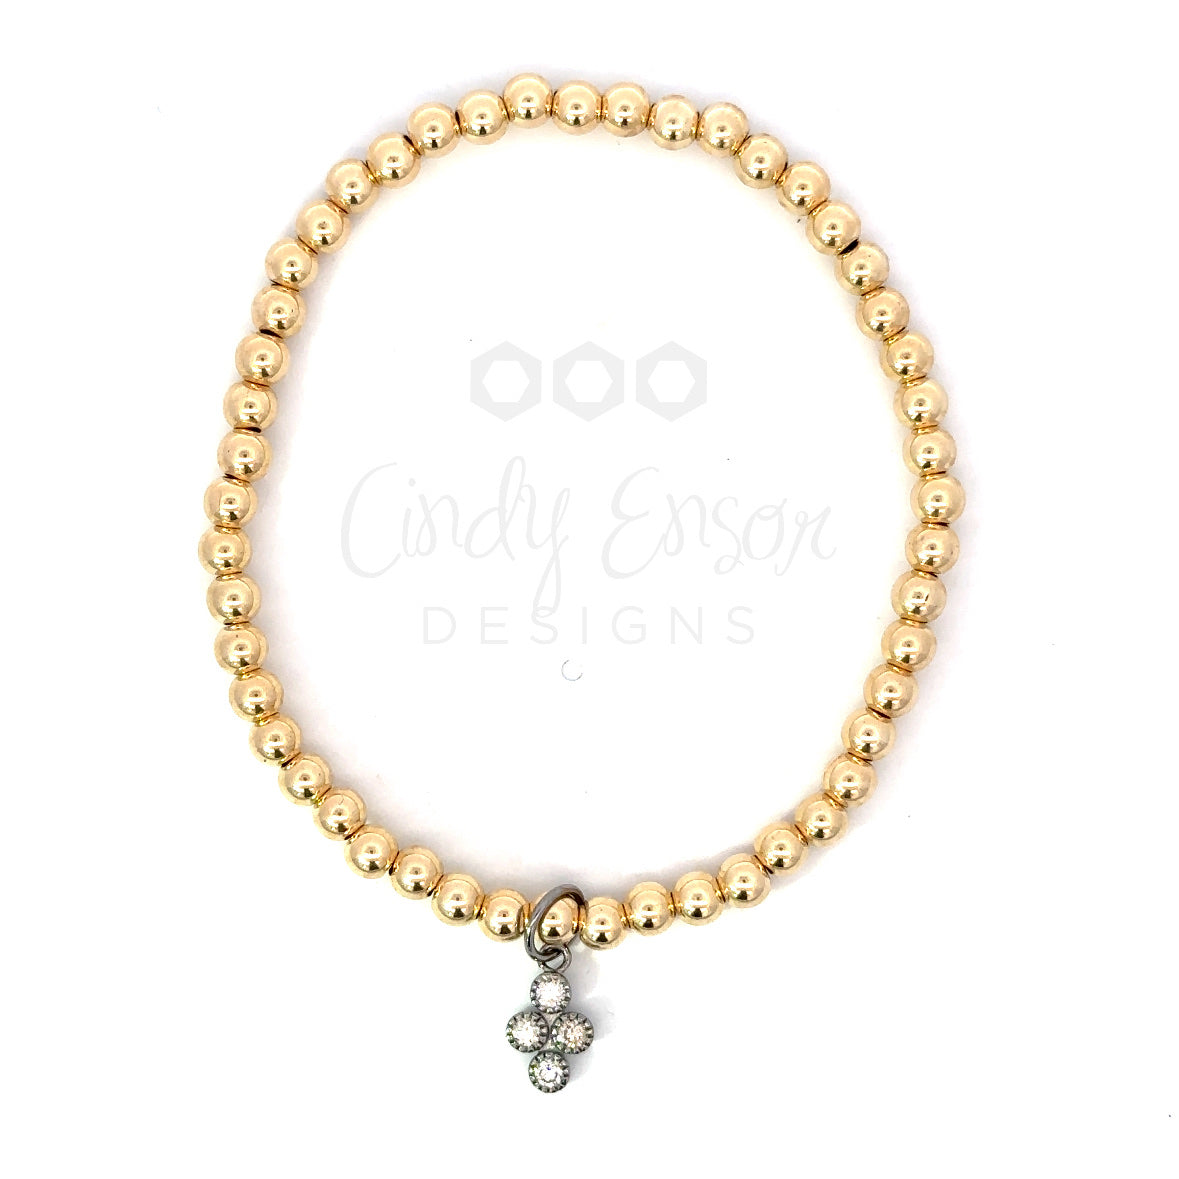 4mm Yellow Gold Filled Bead Bracelet with Sterling Diamond Dot Charm